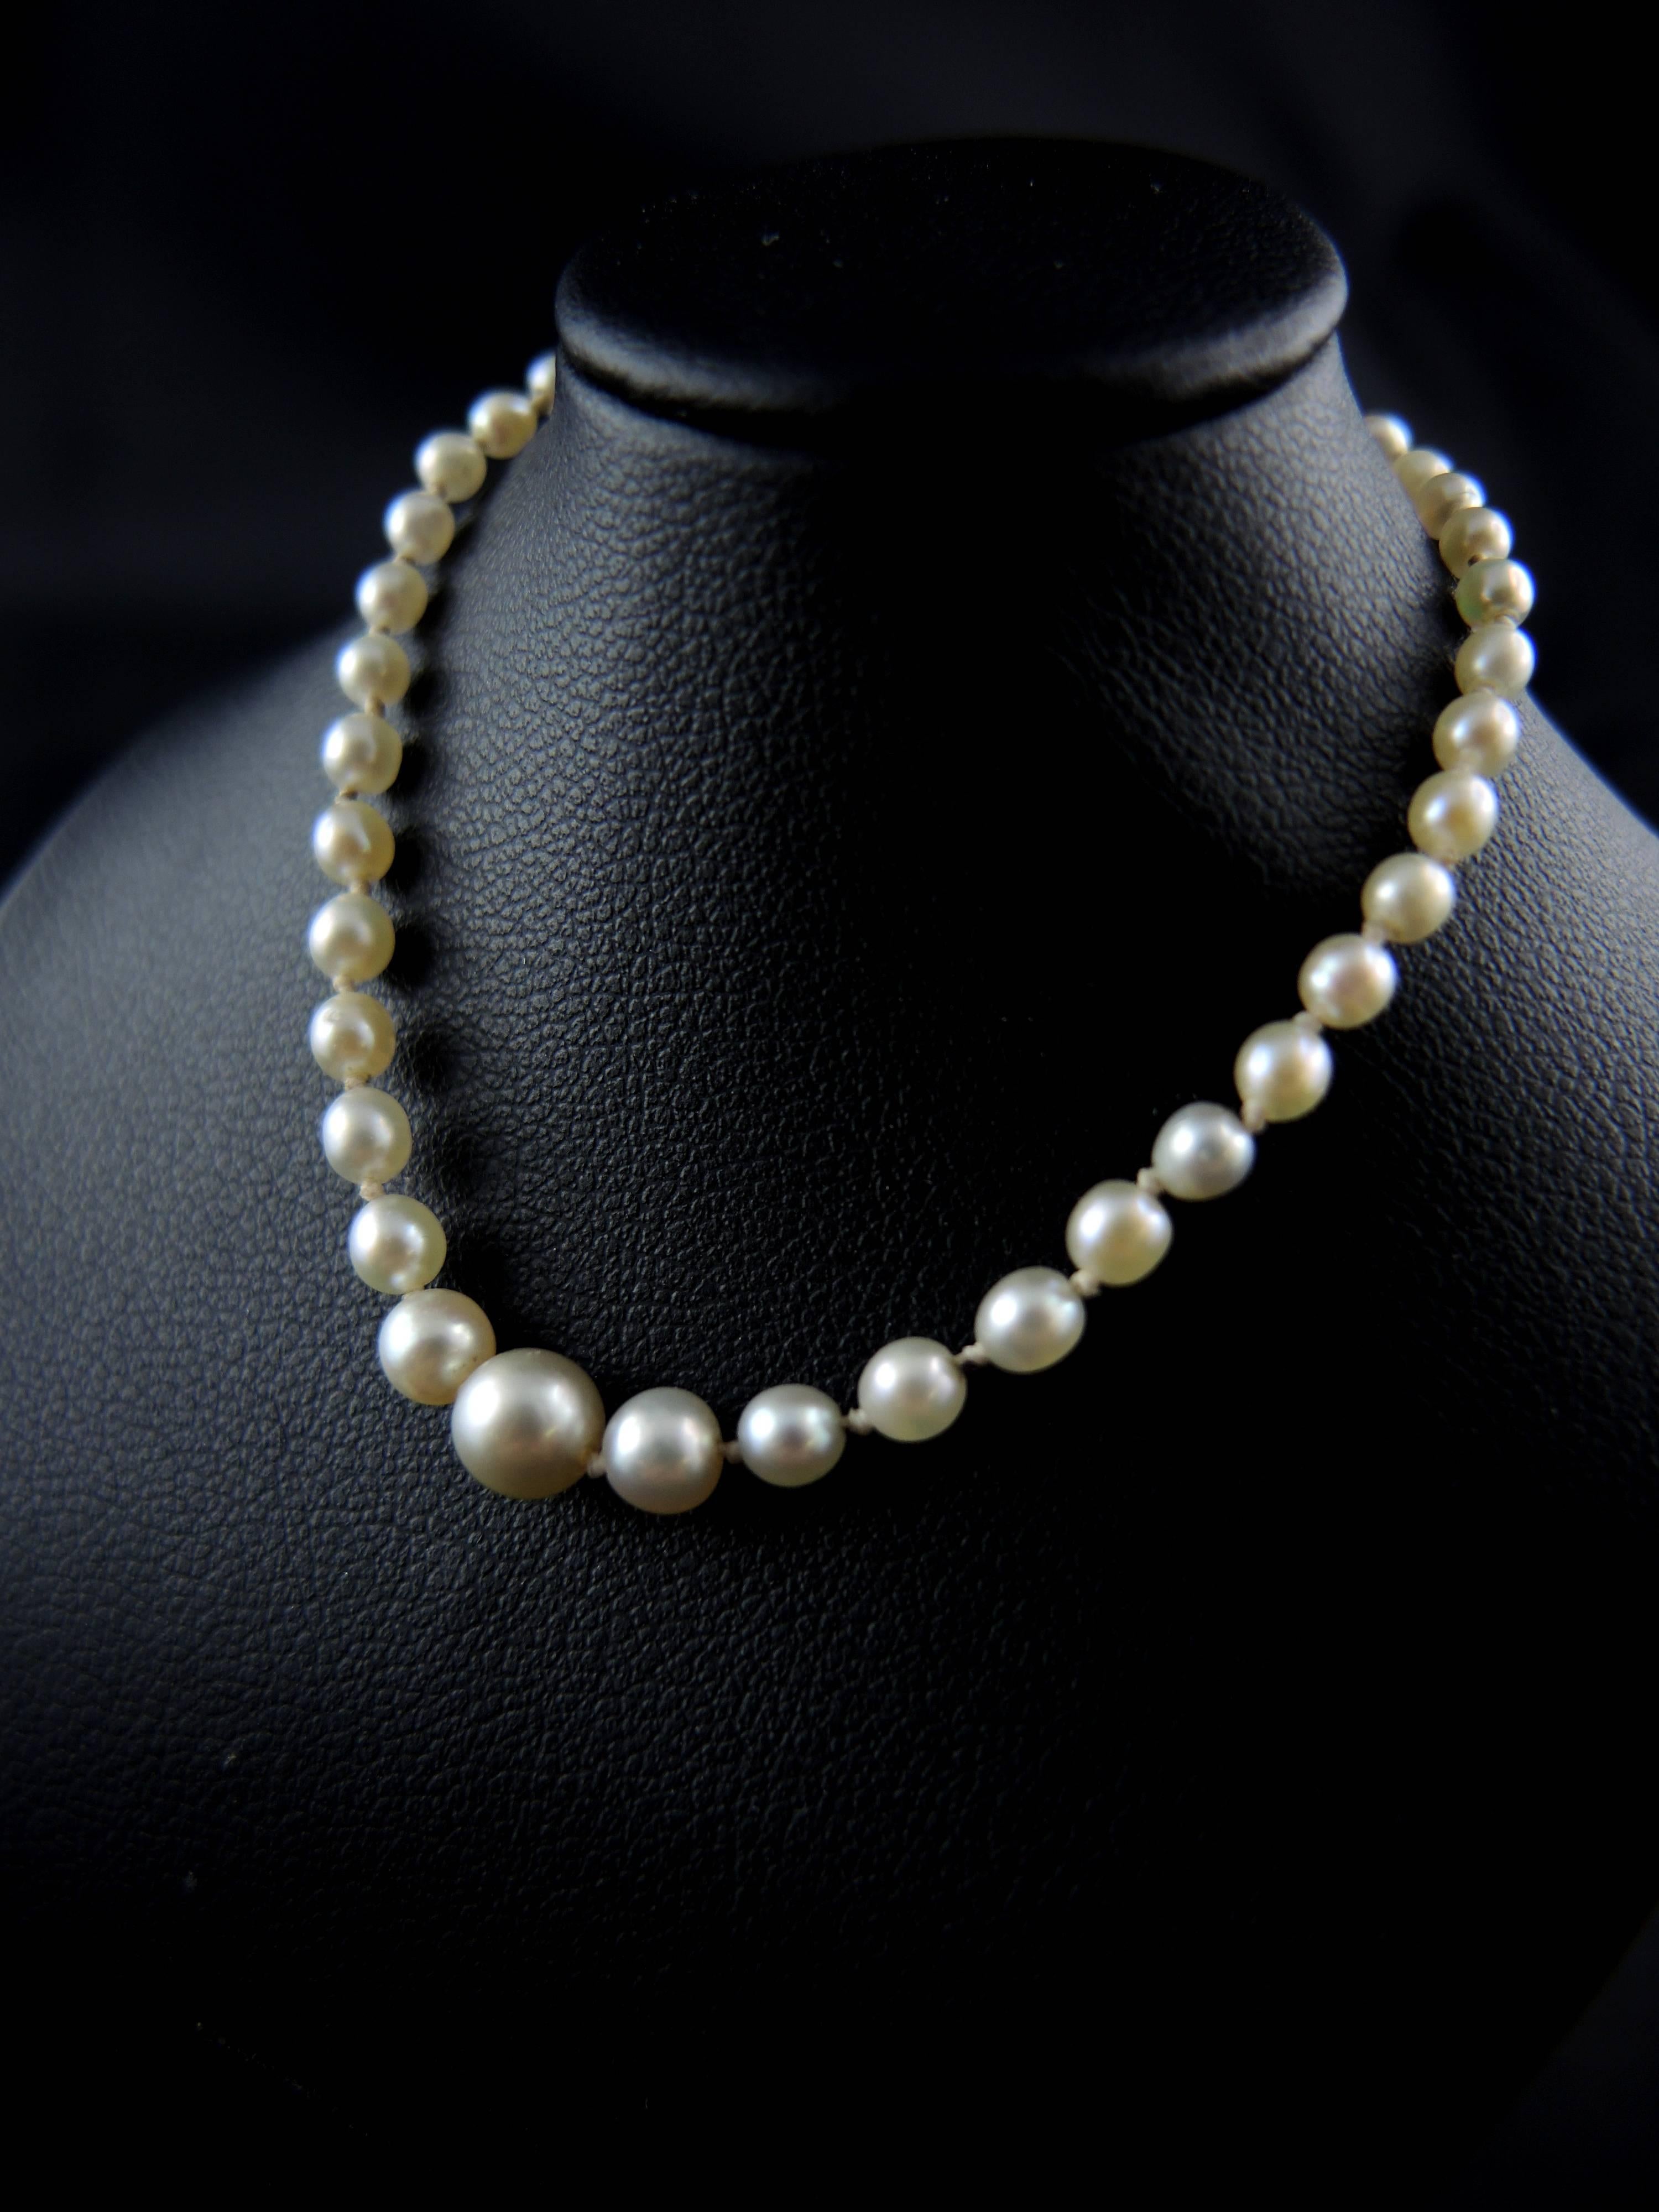 Antique Art Deco necklace set with one rank of natural pearls.
Sold with a LFG laboratory certificate (all pearls are natural exept one which is cultured).

Clasp and safety chaine made of gold.

Circa 1920.

weight: 4.79 g
Length of the ranks: